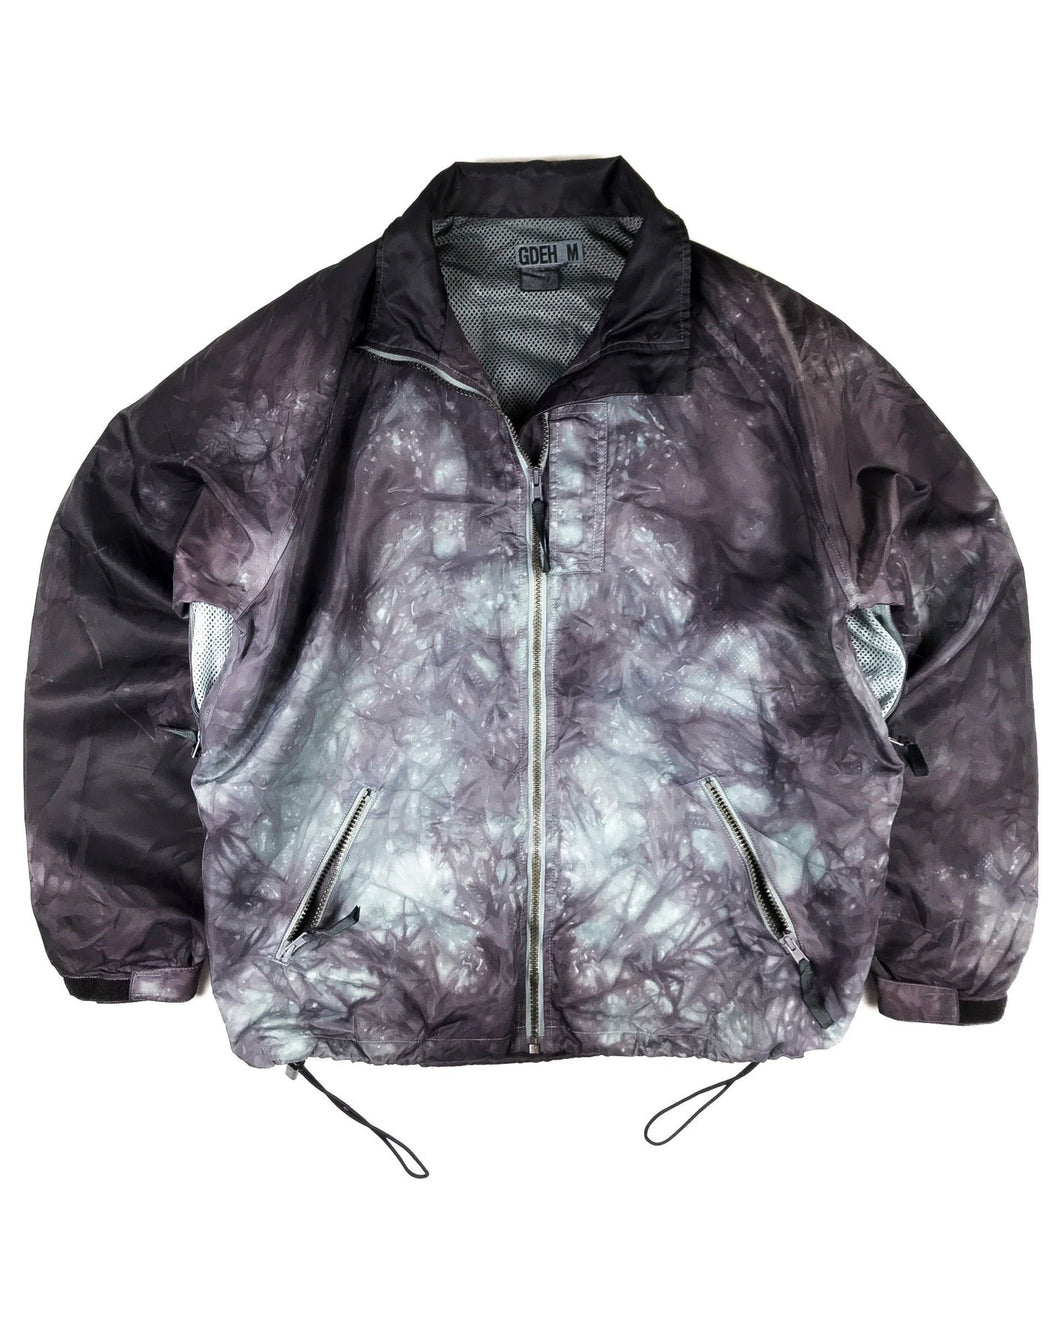 GOODENOUGH x UNKNOWNSTORE Hand Dyed Ventilated Windbreaker (1999)(M-L)